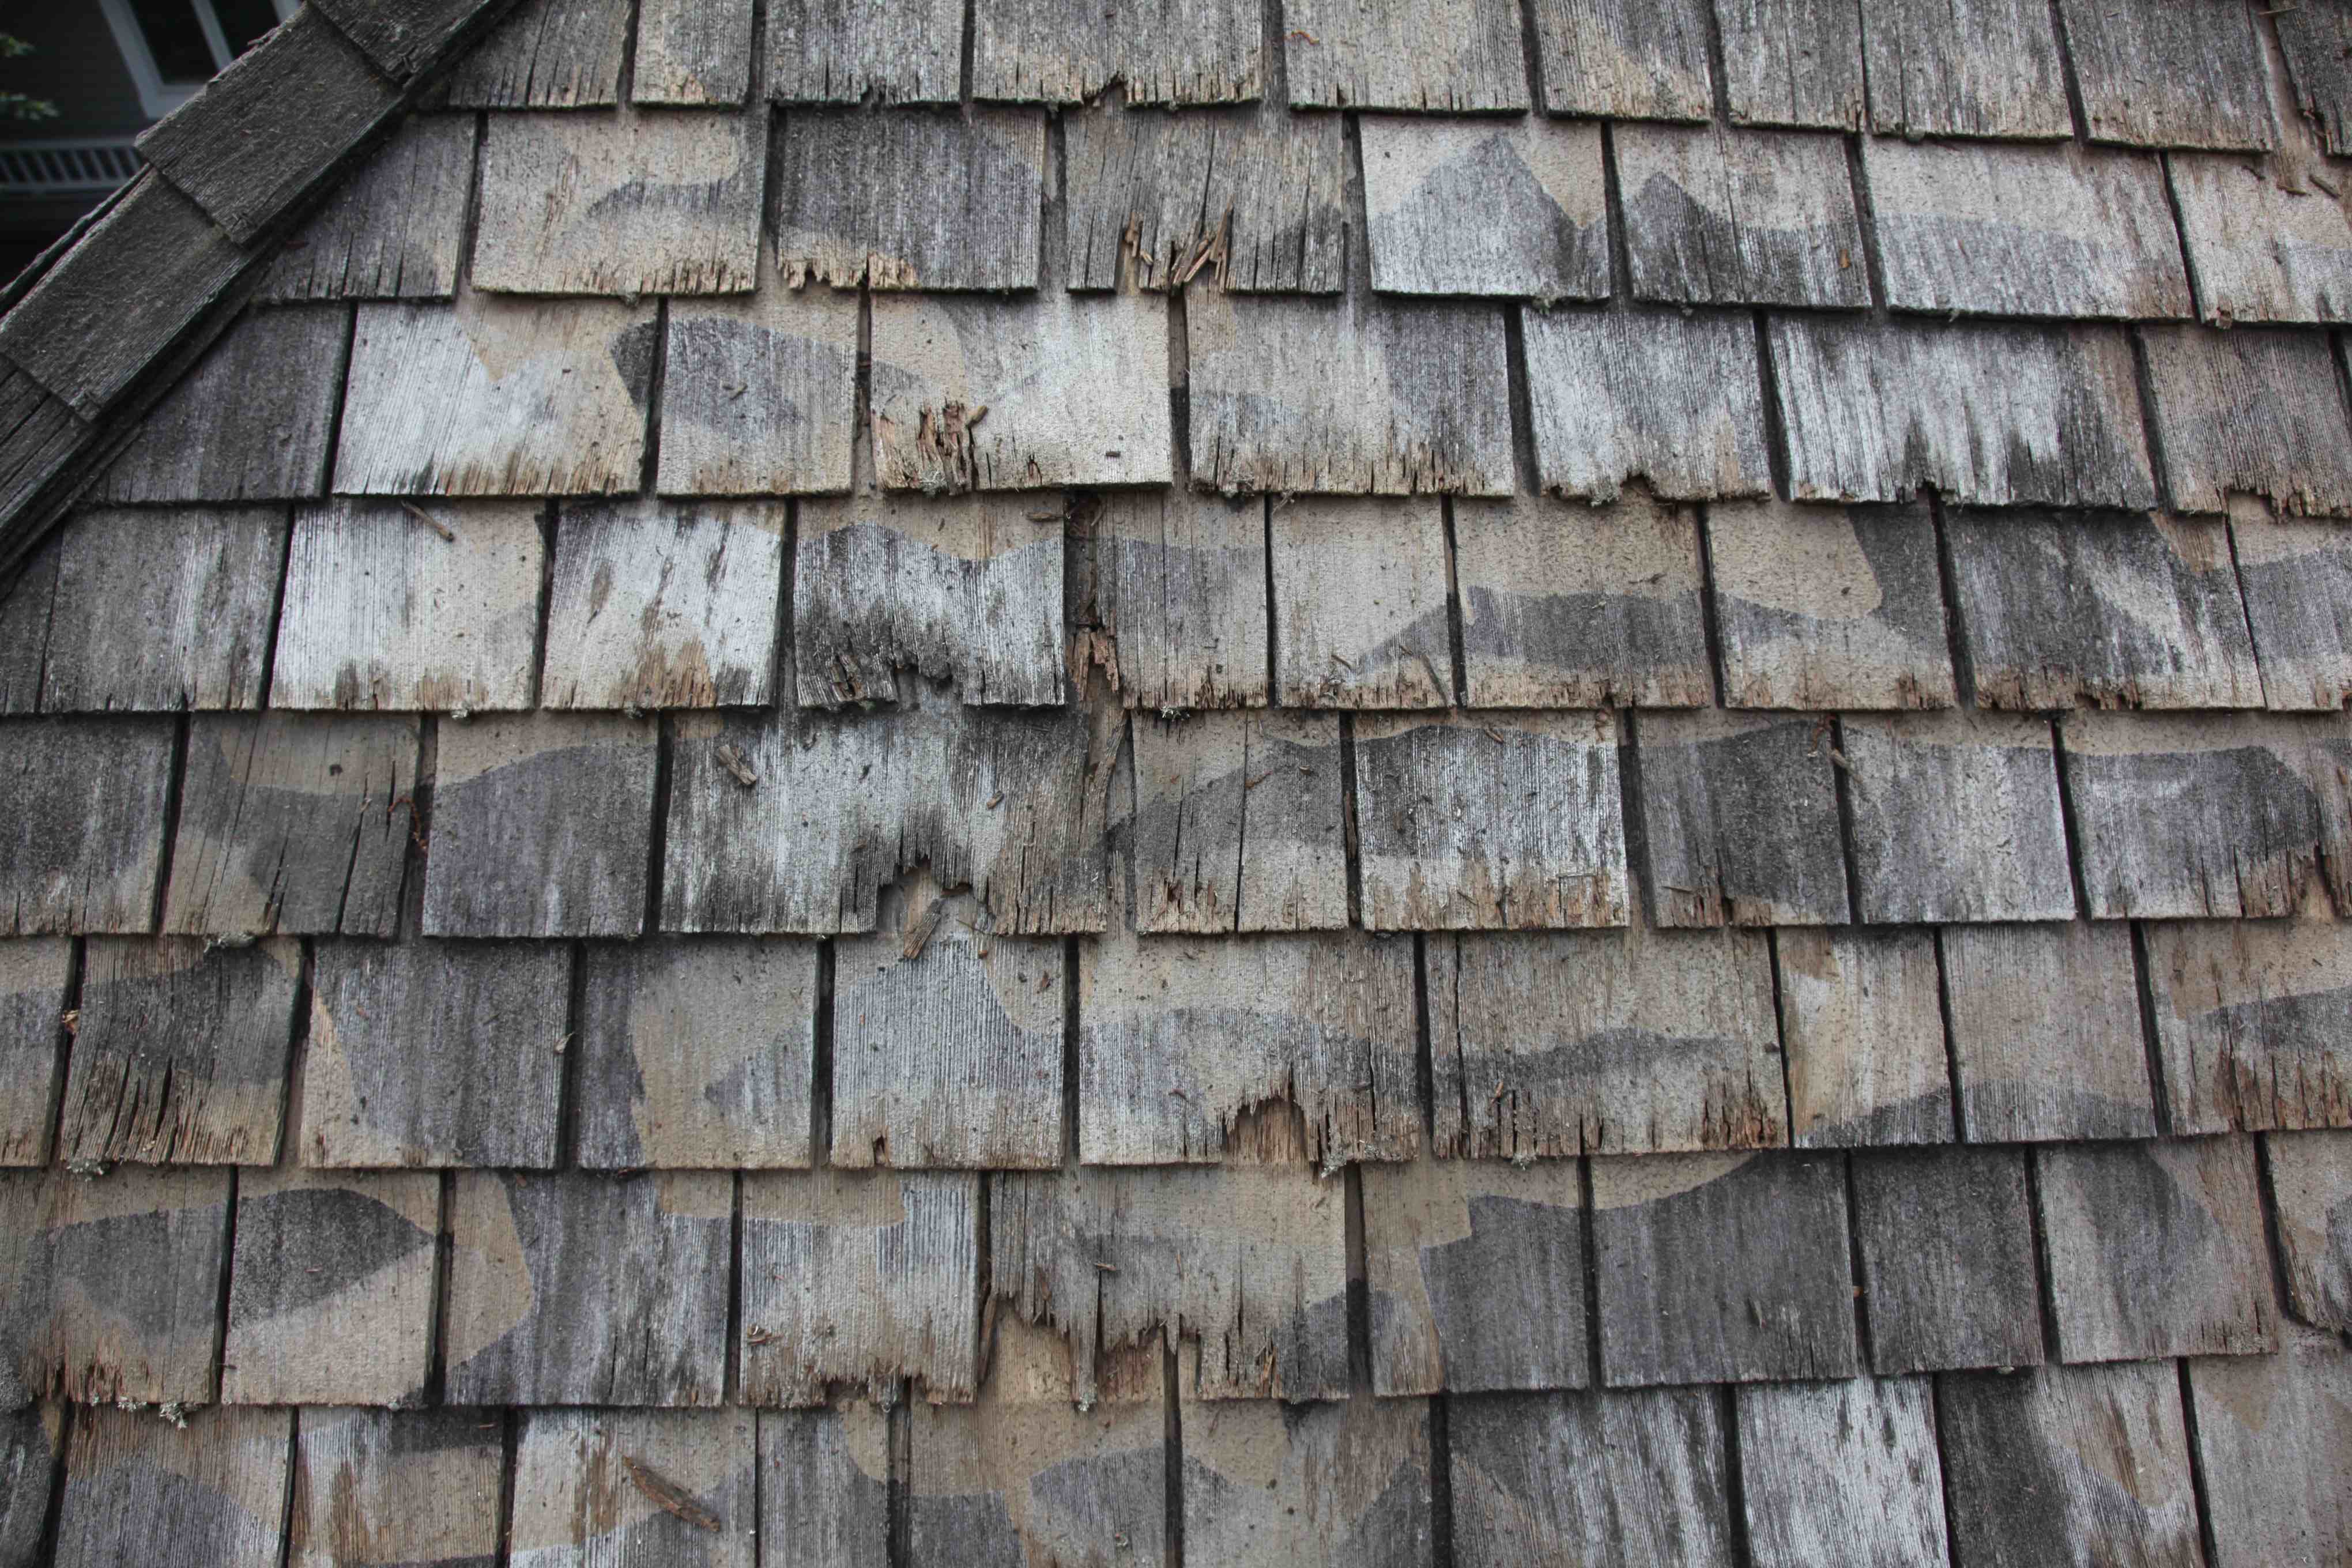 Blog Archive Should wood roofs be pressure washed? - Kuhl's Contracting